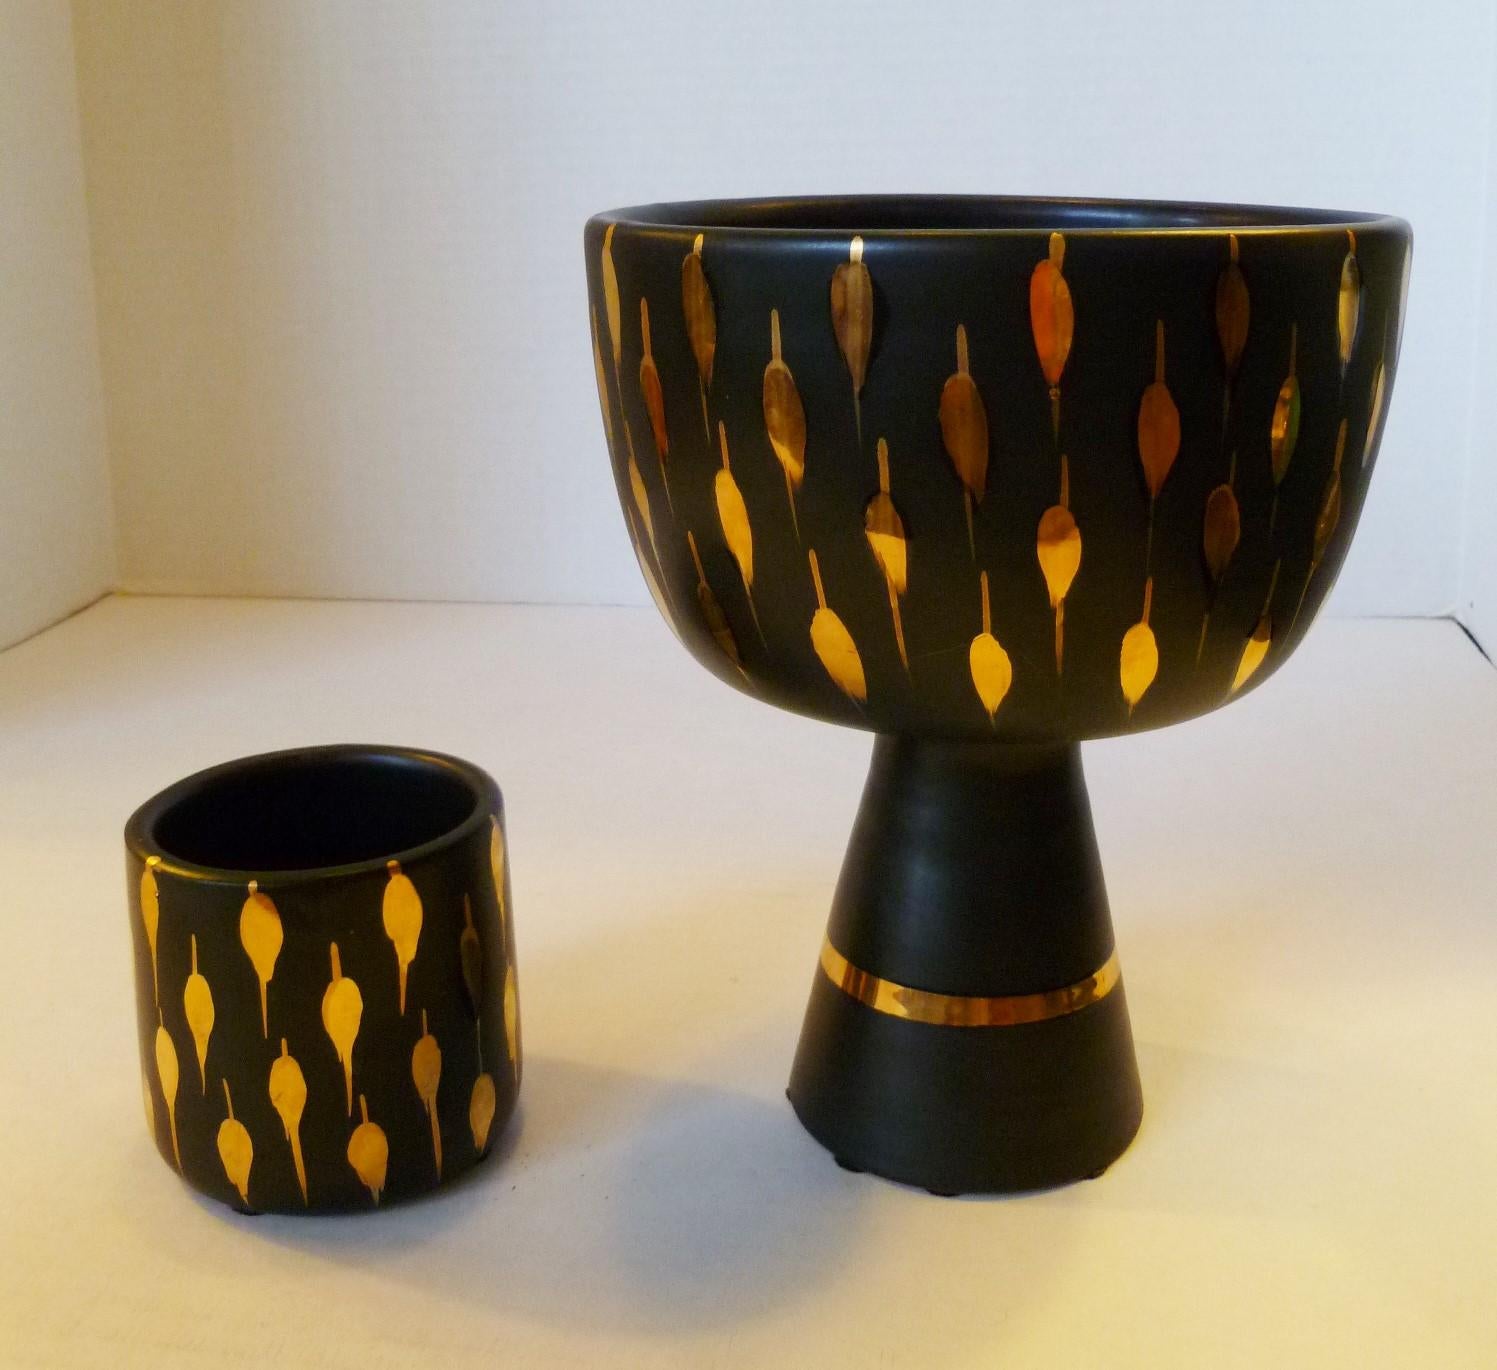 Elegant and swank 1960s Italian pottery vessels with black glaze highlighted with a gilt gold teardrop pattern. Consisting of a shorter Tumbler shape vessel and a taller footed Vessel.
Measurements: Tumbler 3 inches in diameter x 2 7/8 inches high.